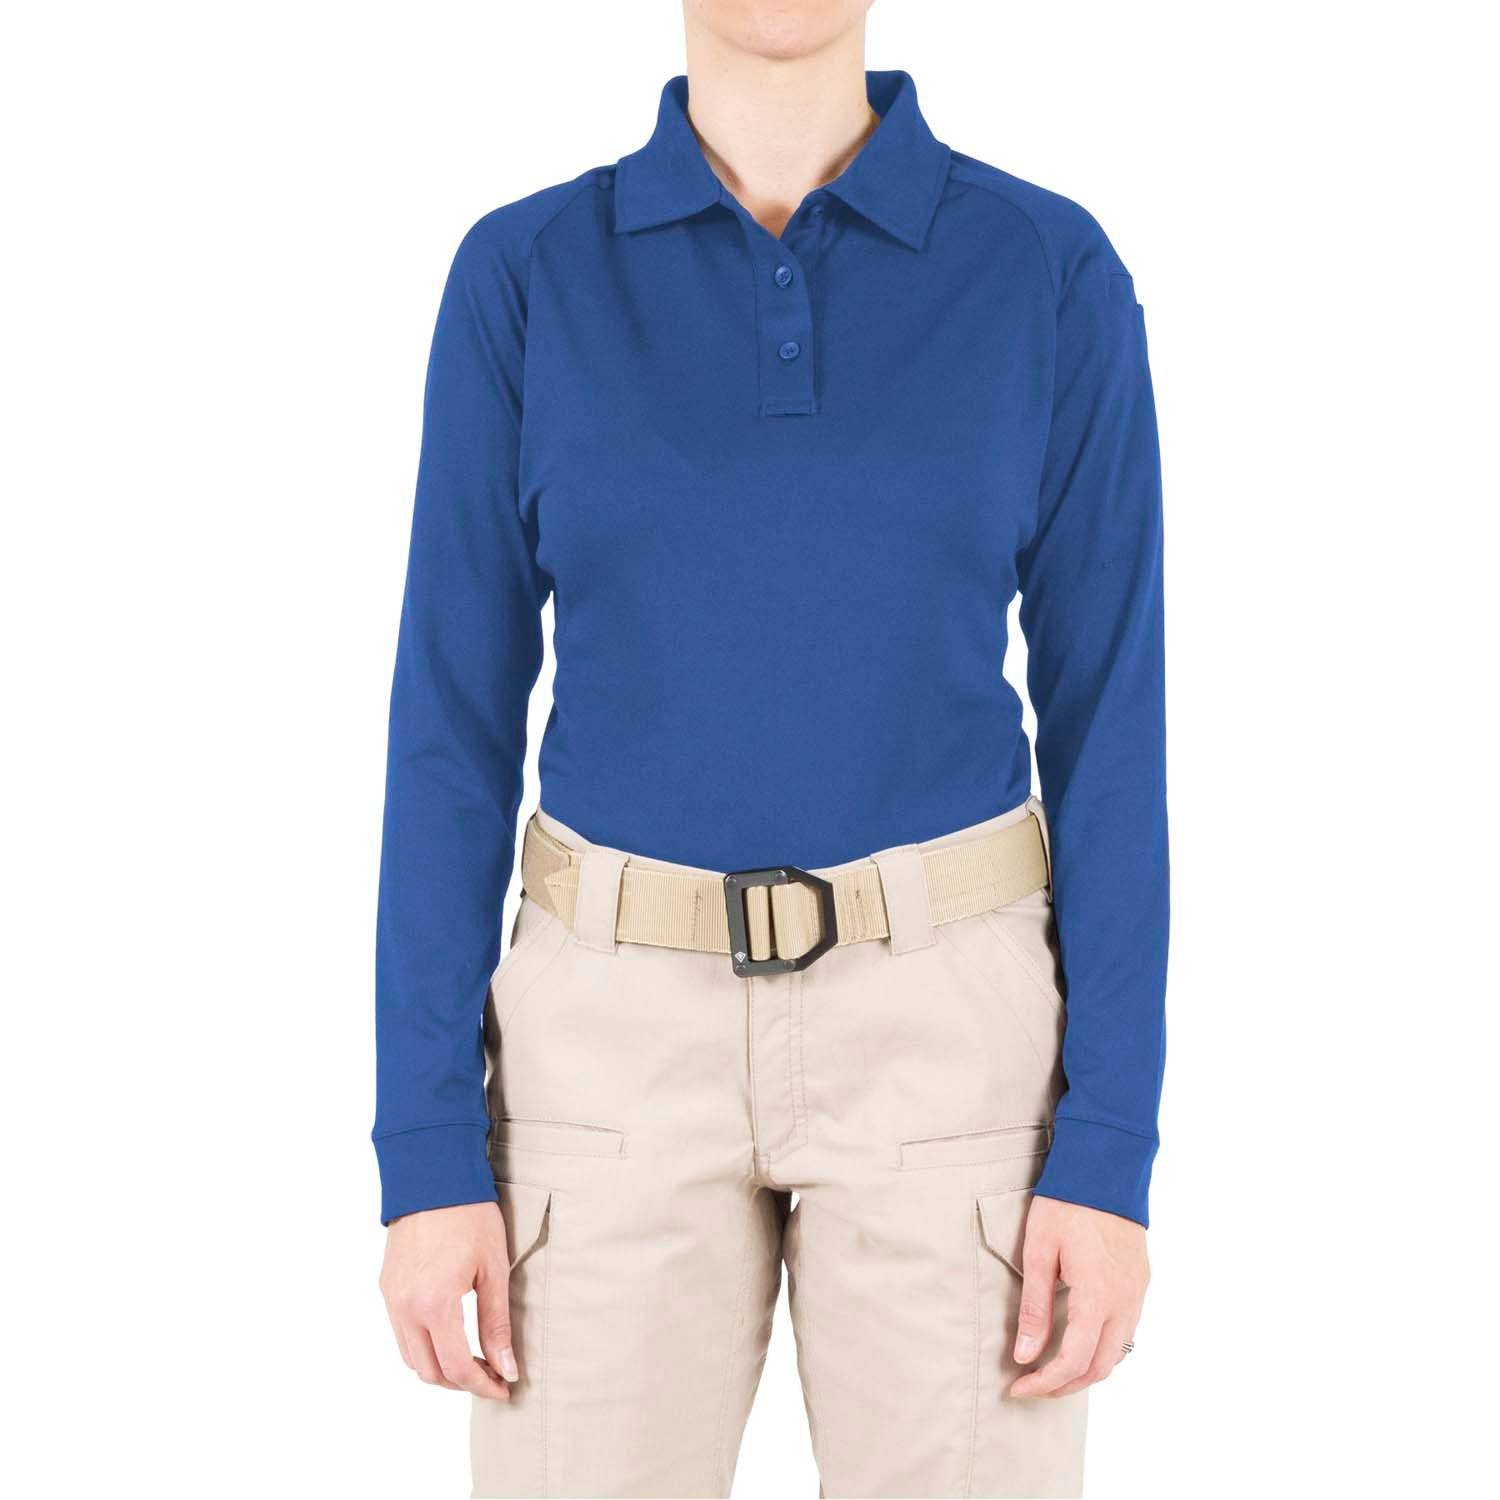 FIRST TACTICAL WOMEN'S LONG SLEEVE PERFORMANCE POLO